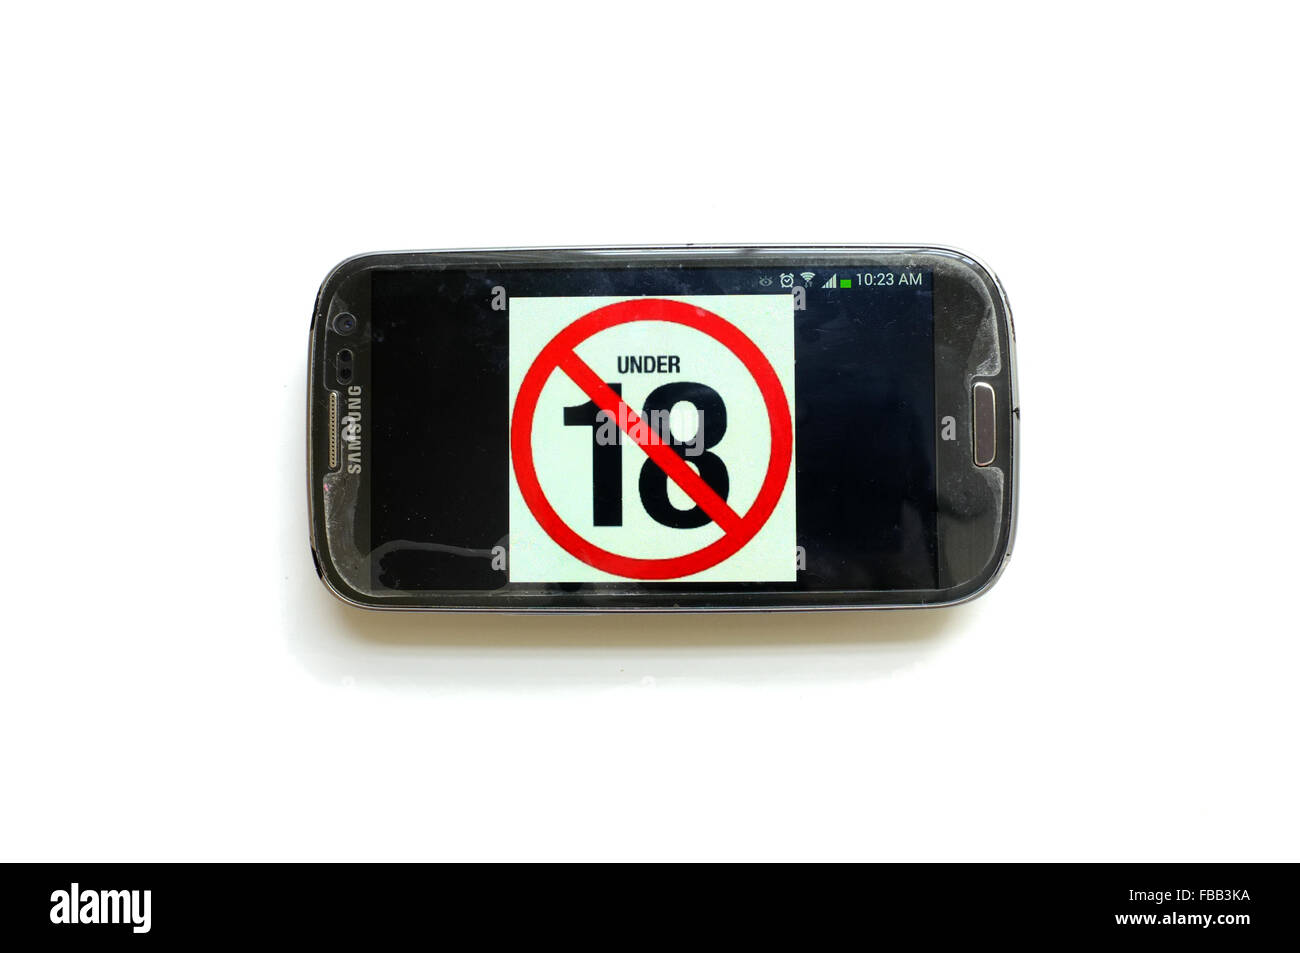 An under 18 image on a smartphone screen photographed against a white background. Stock Photo